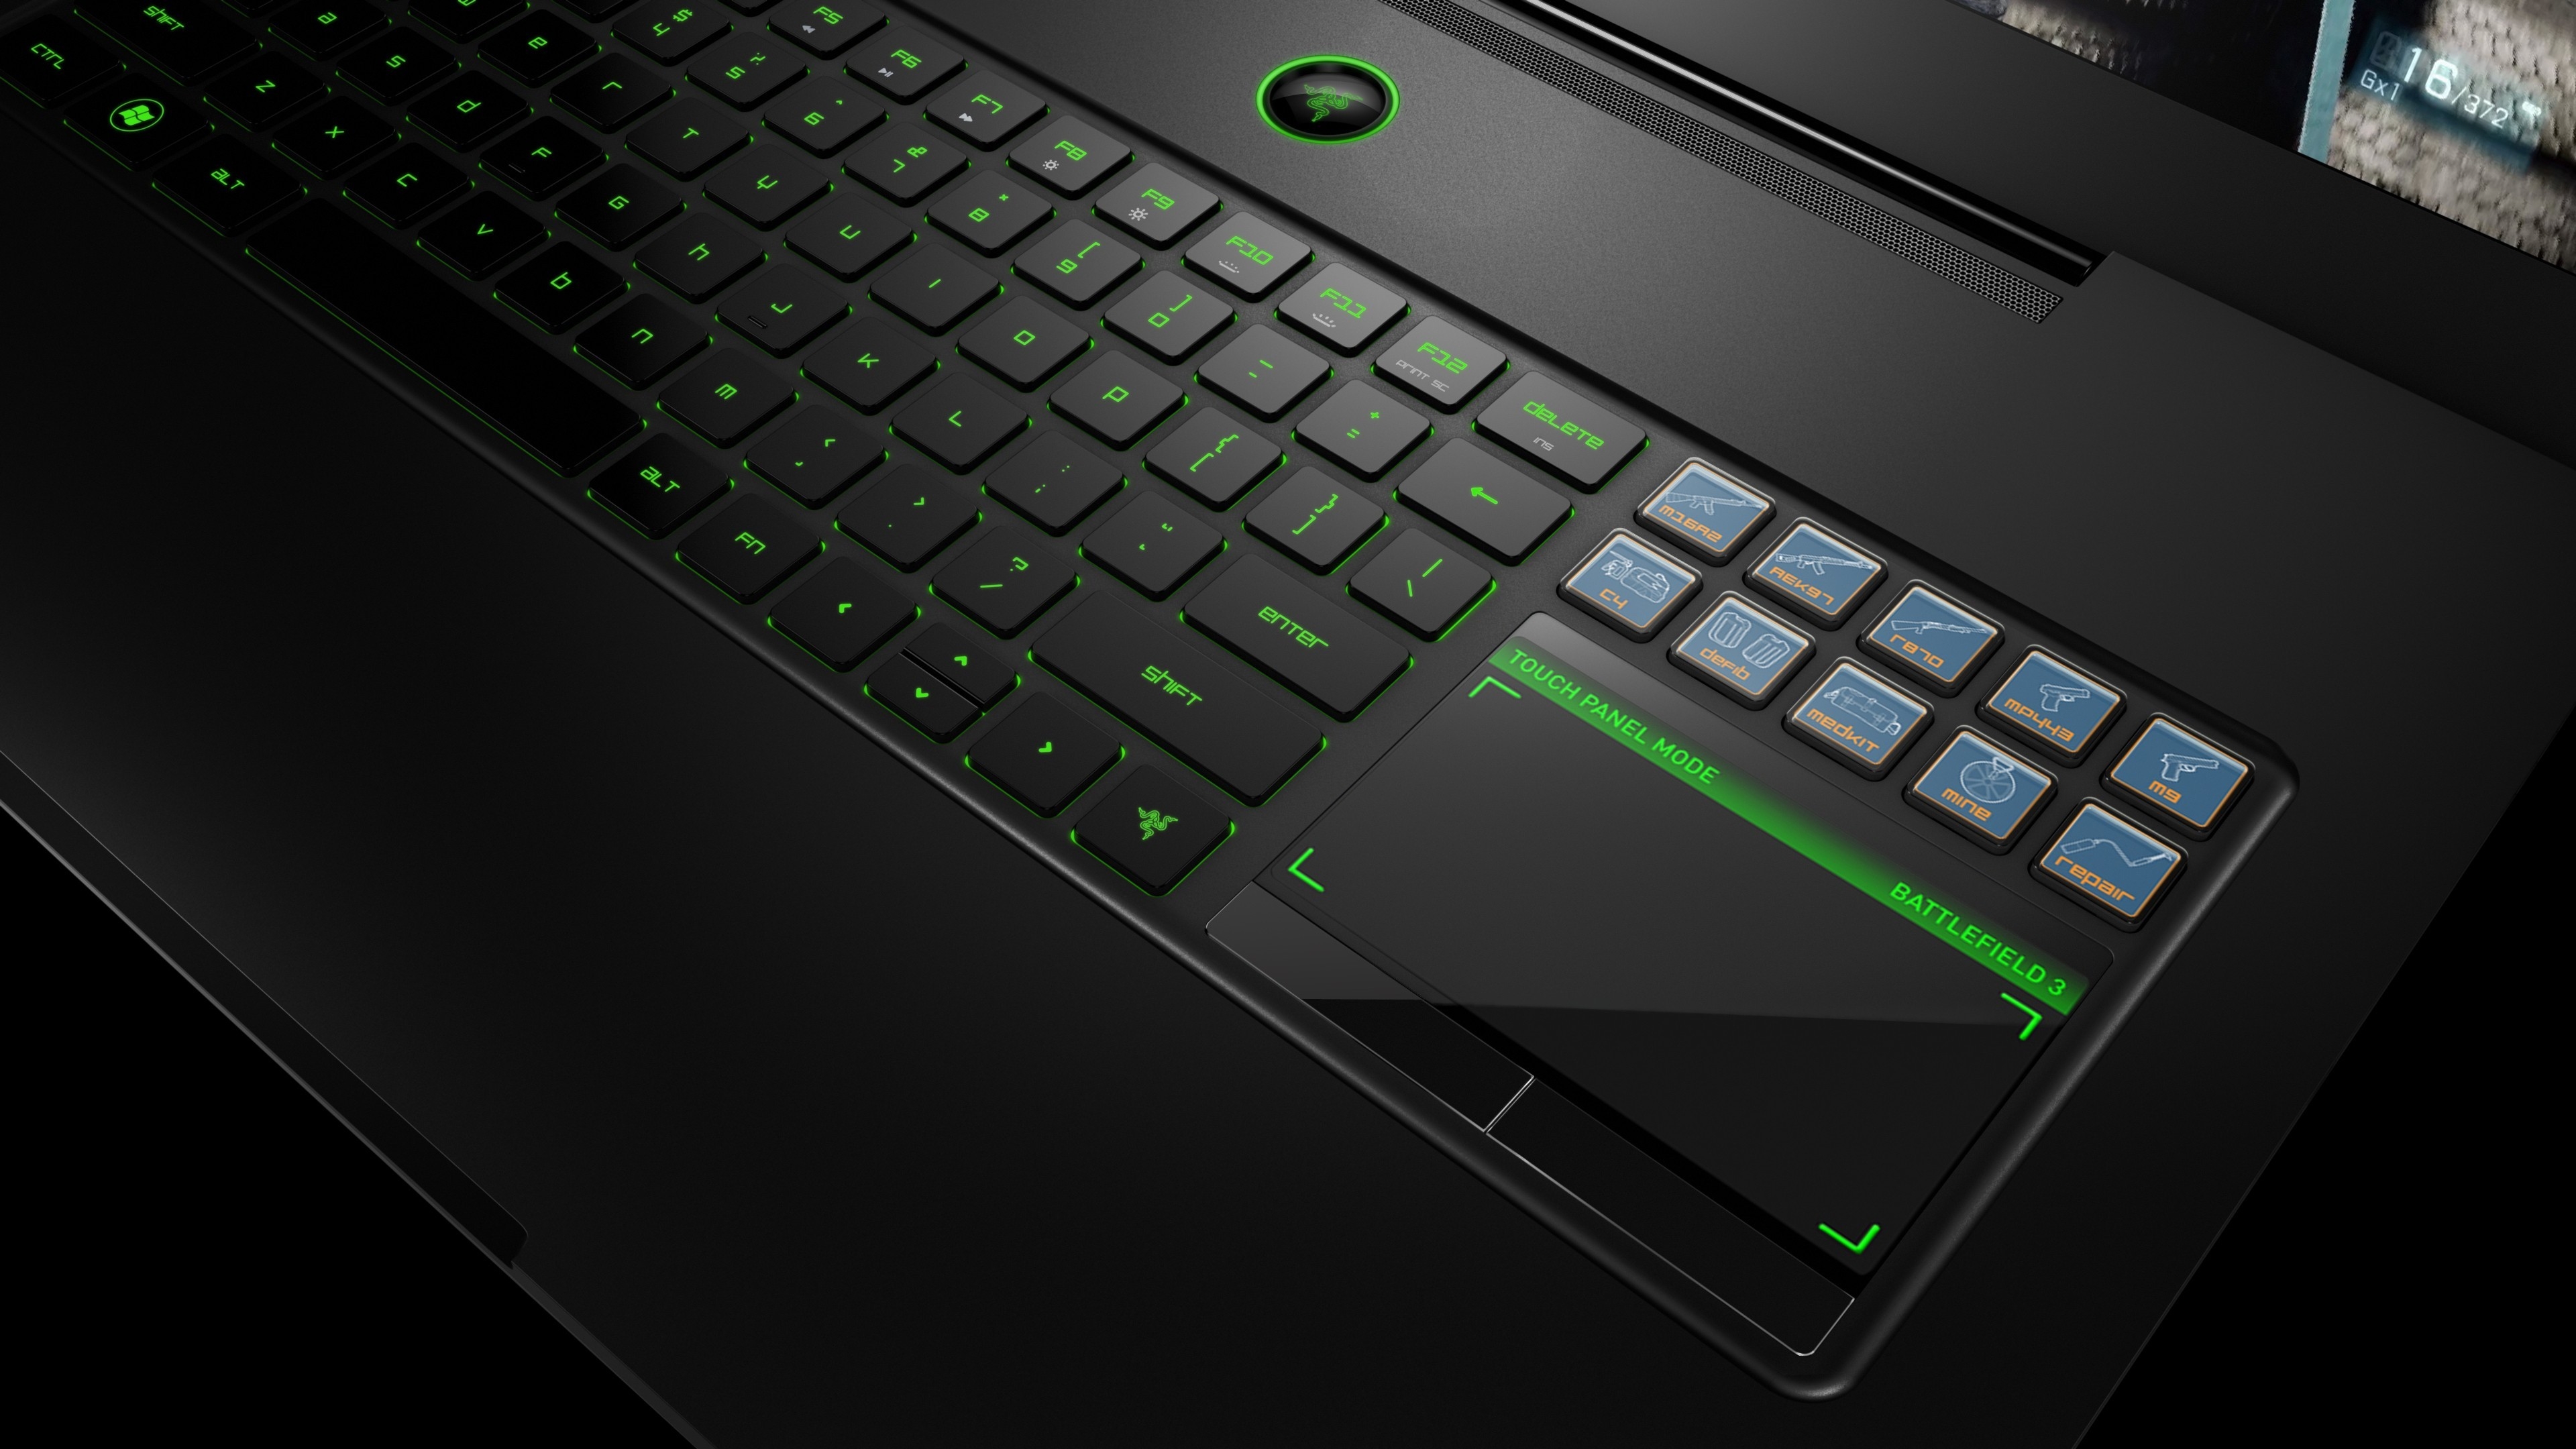 Razer Laptop Surface for 3840 x 2160 Ultra HD resolution